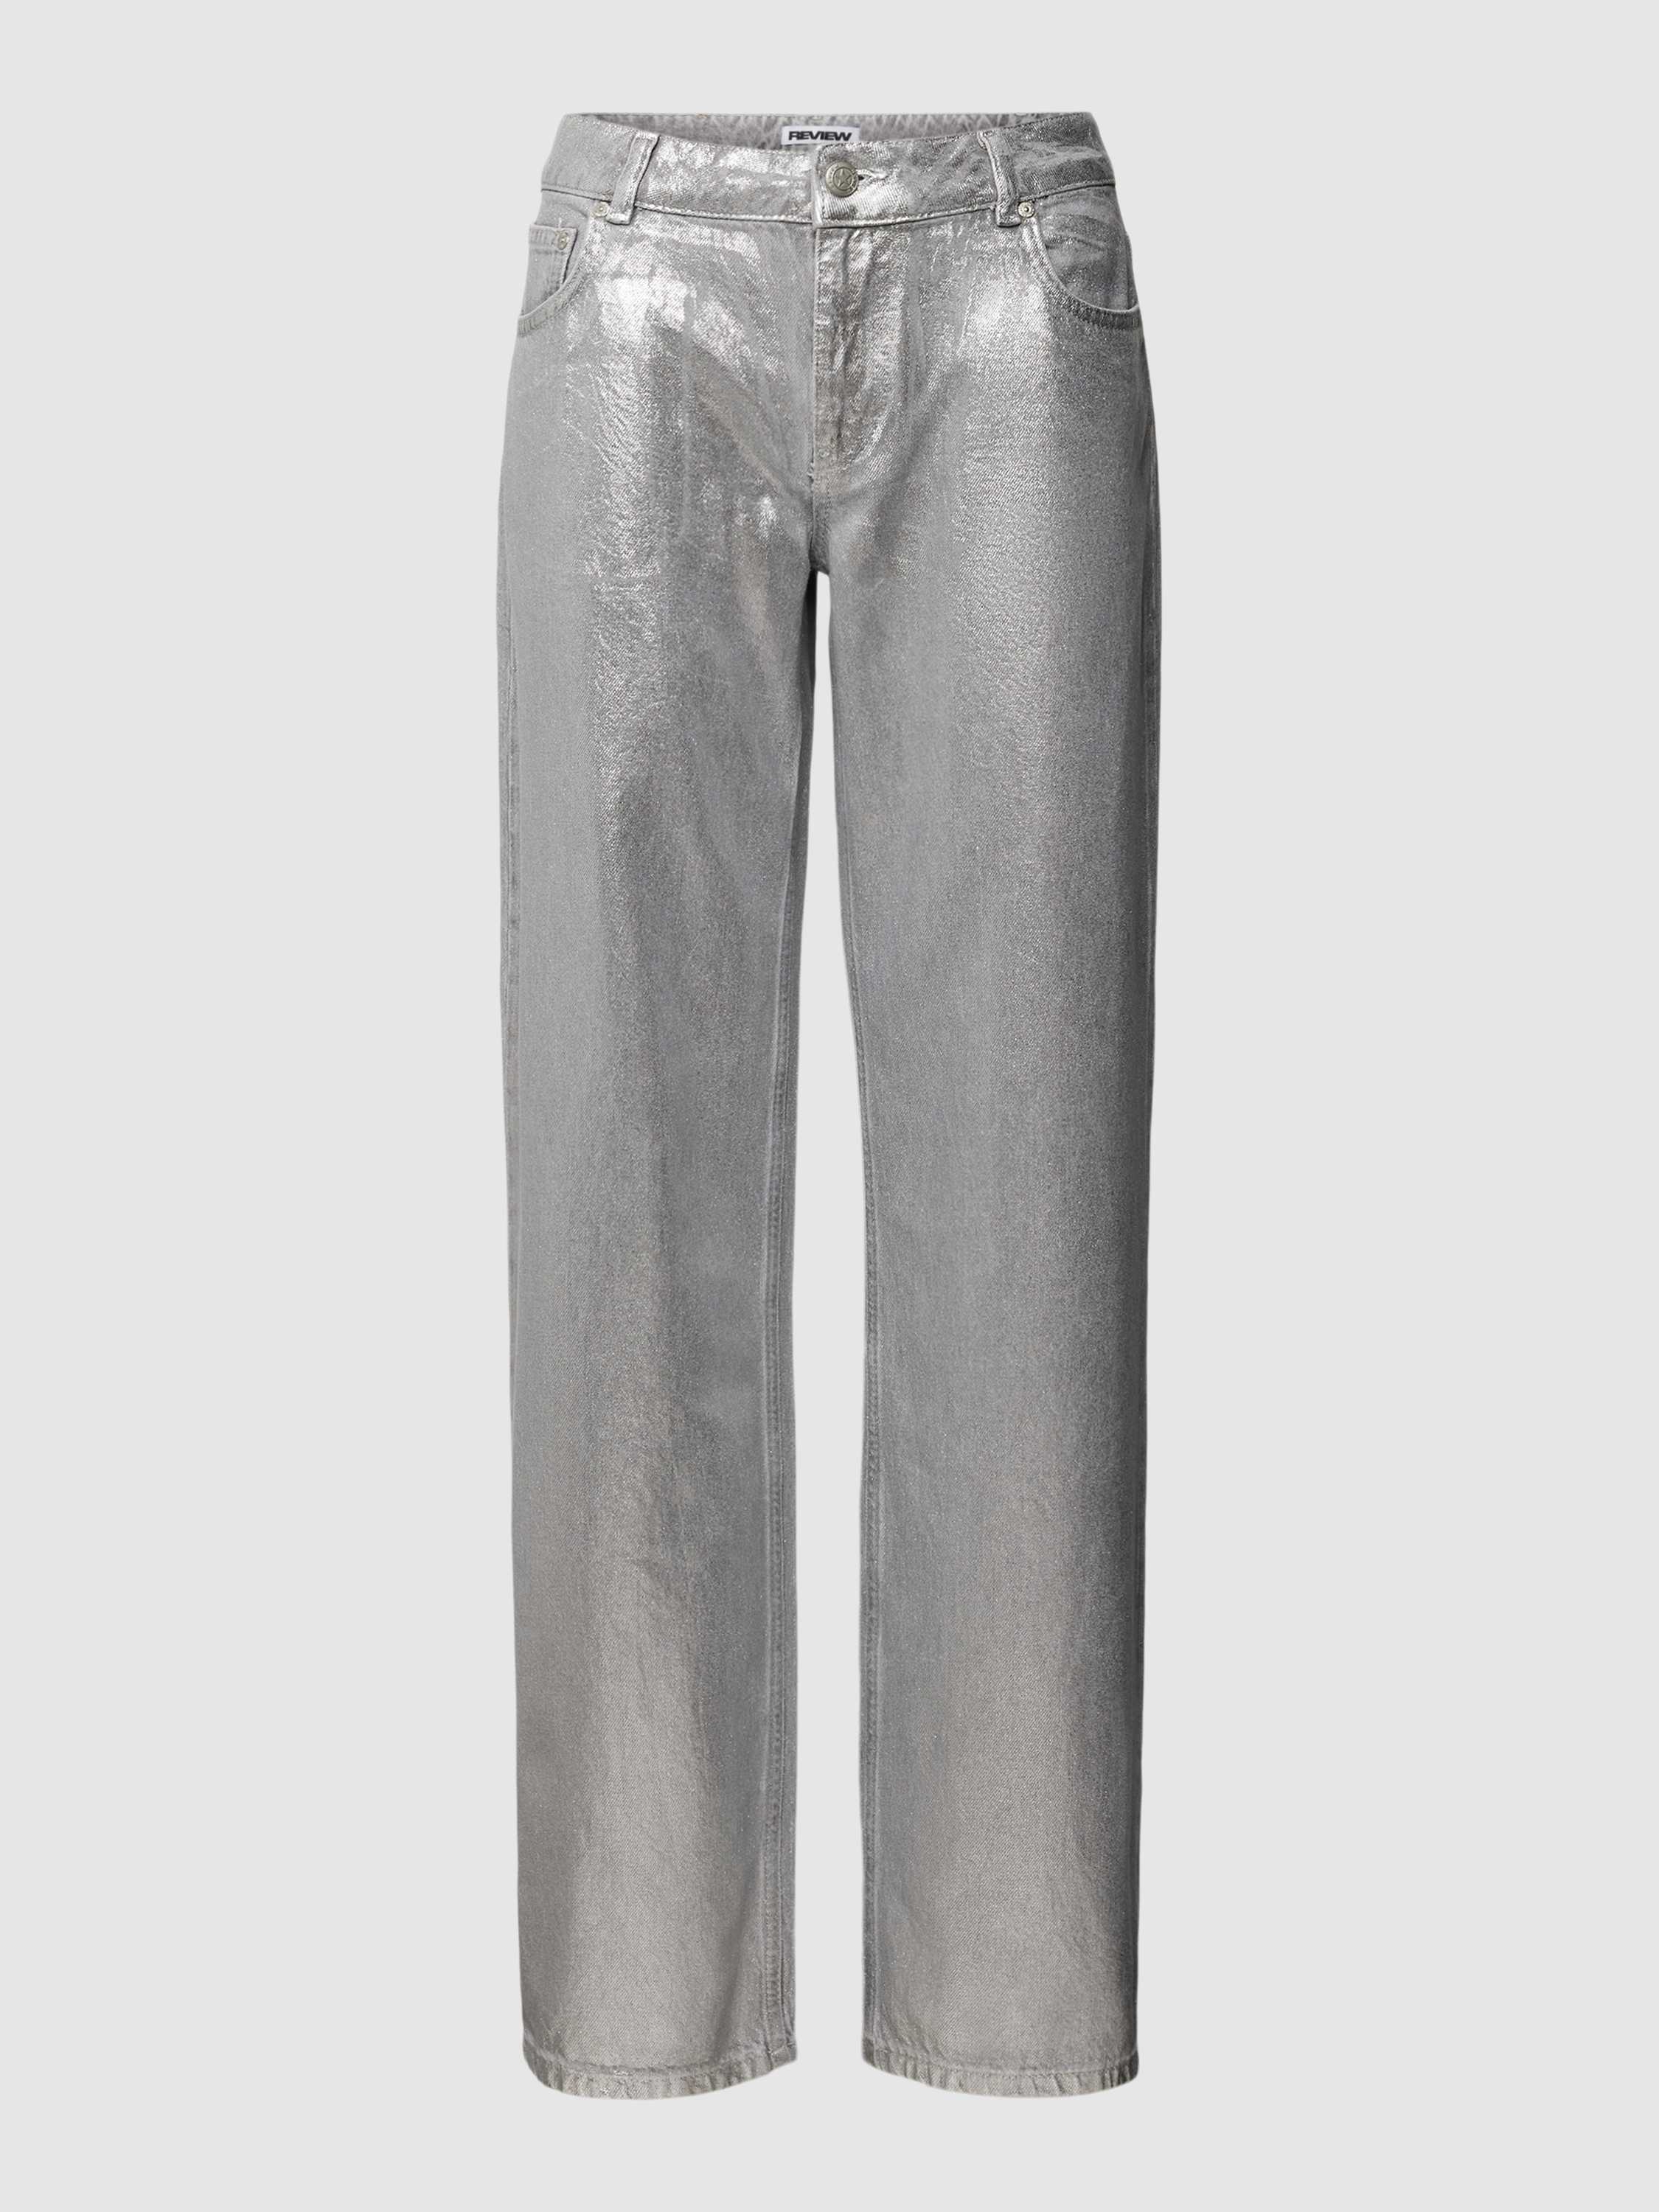 Review Straight leg jeans in zilver metallic